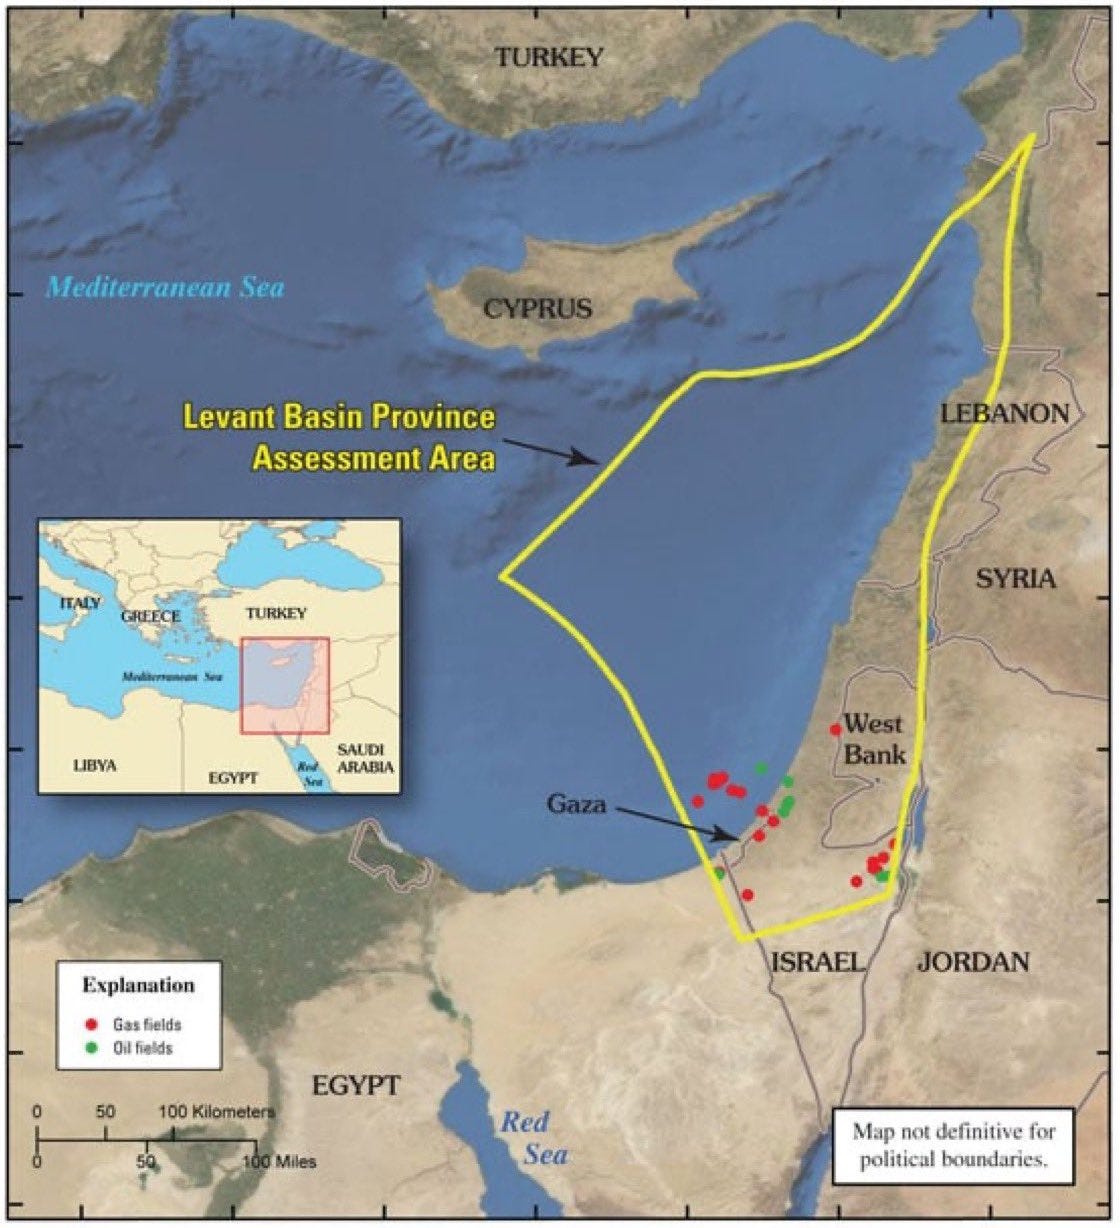 Map showing the Levant Basin Province and Gaza Marine natural gas and oil fields in the Mediterranean Sea.